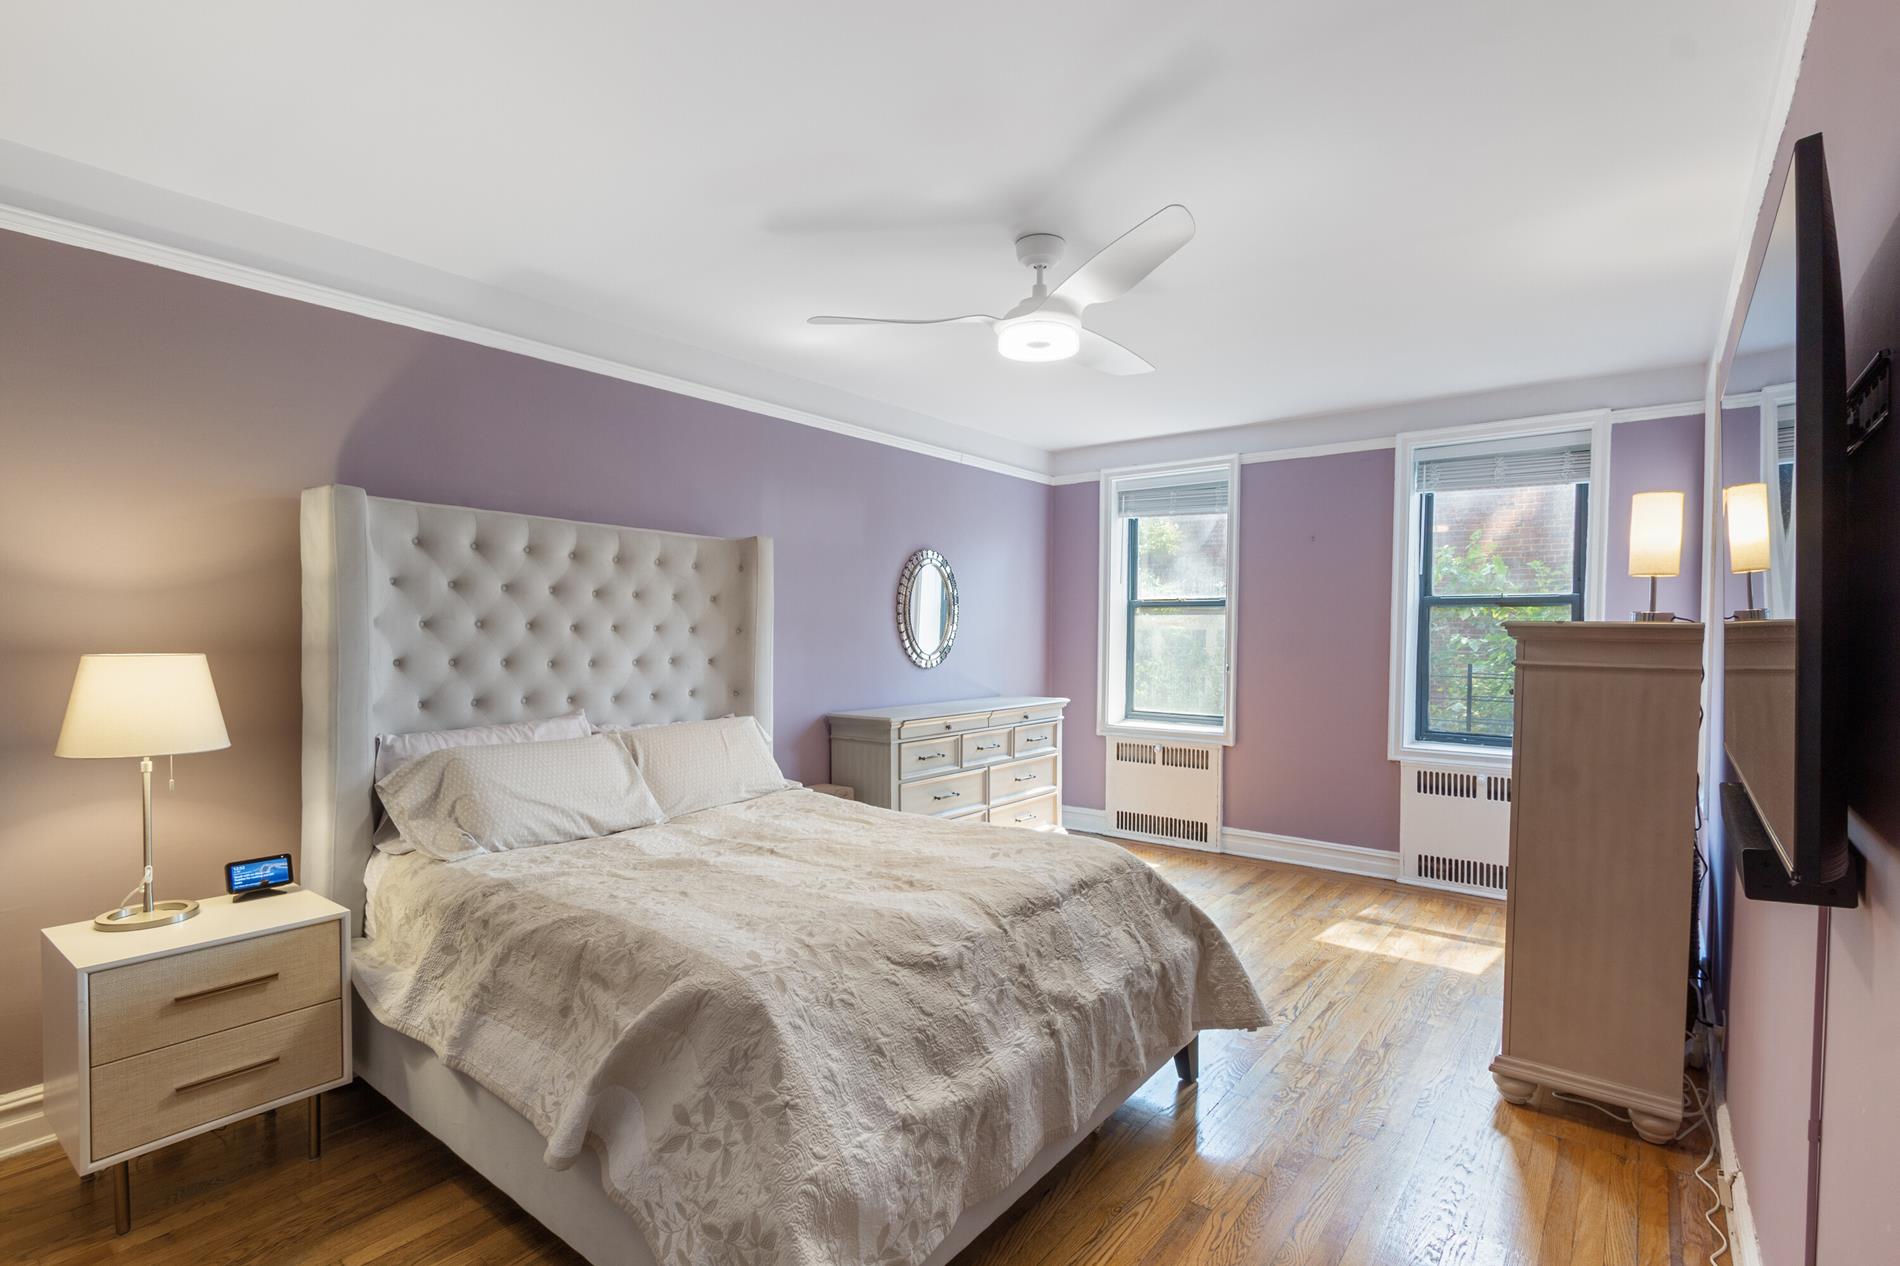 35-06 88th Street 1-F Jackson Heights Queens, NY 11414